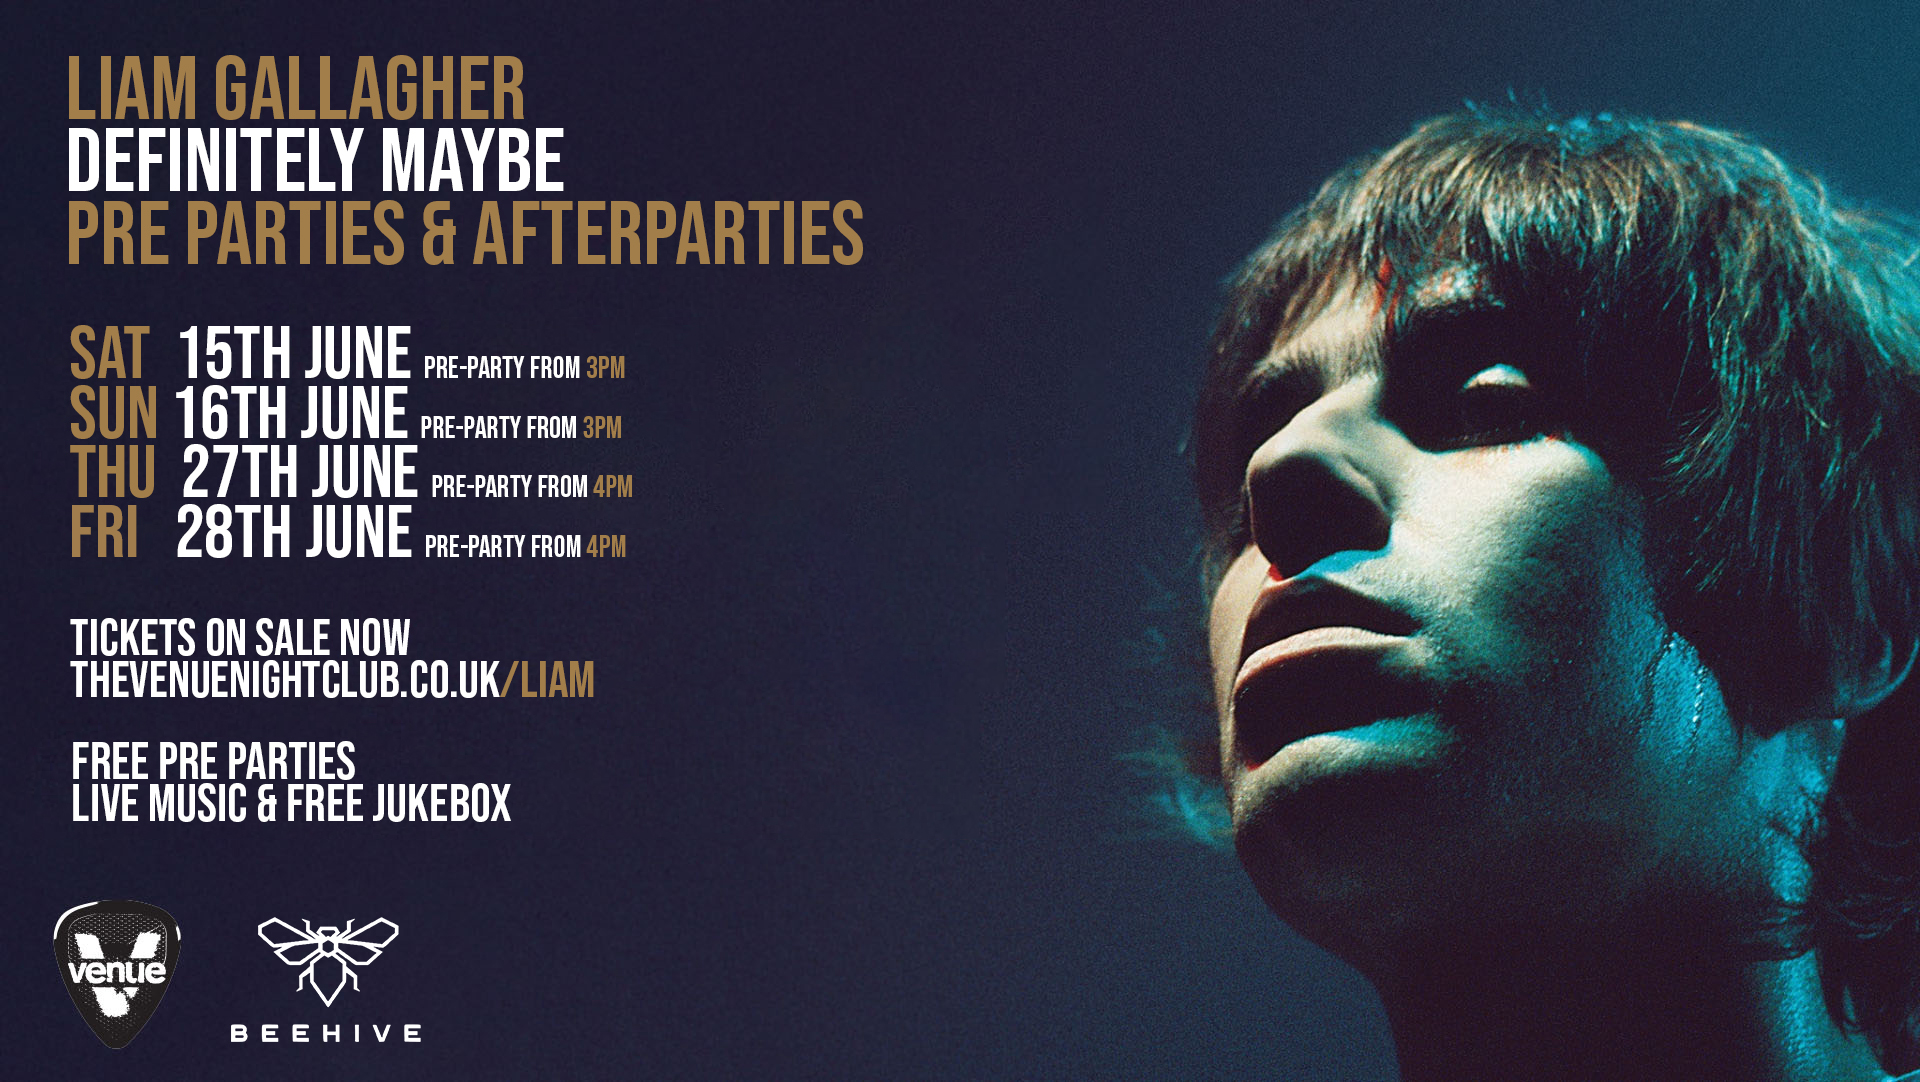 Liam Gallagher Afterparties Manchester